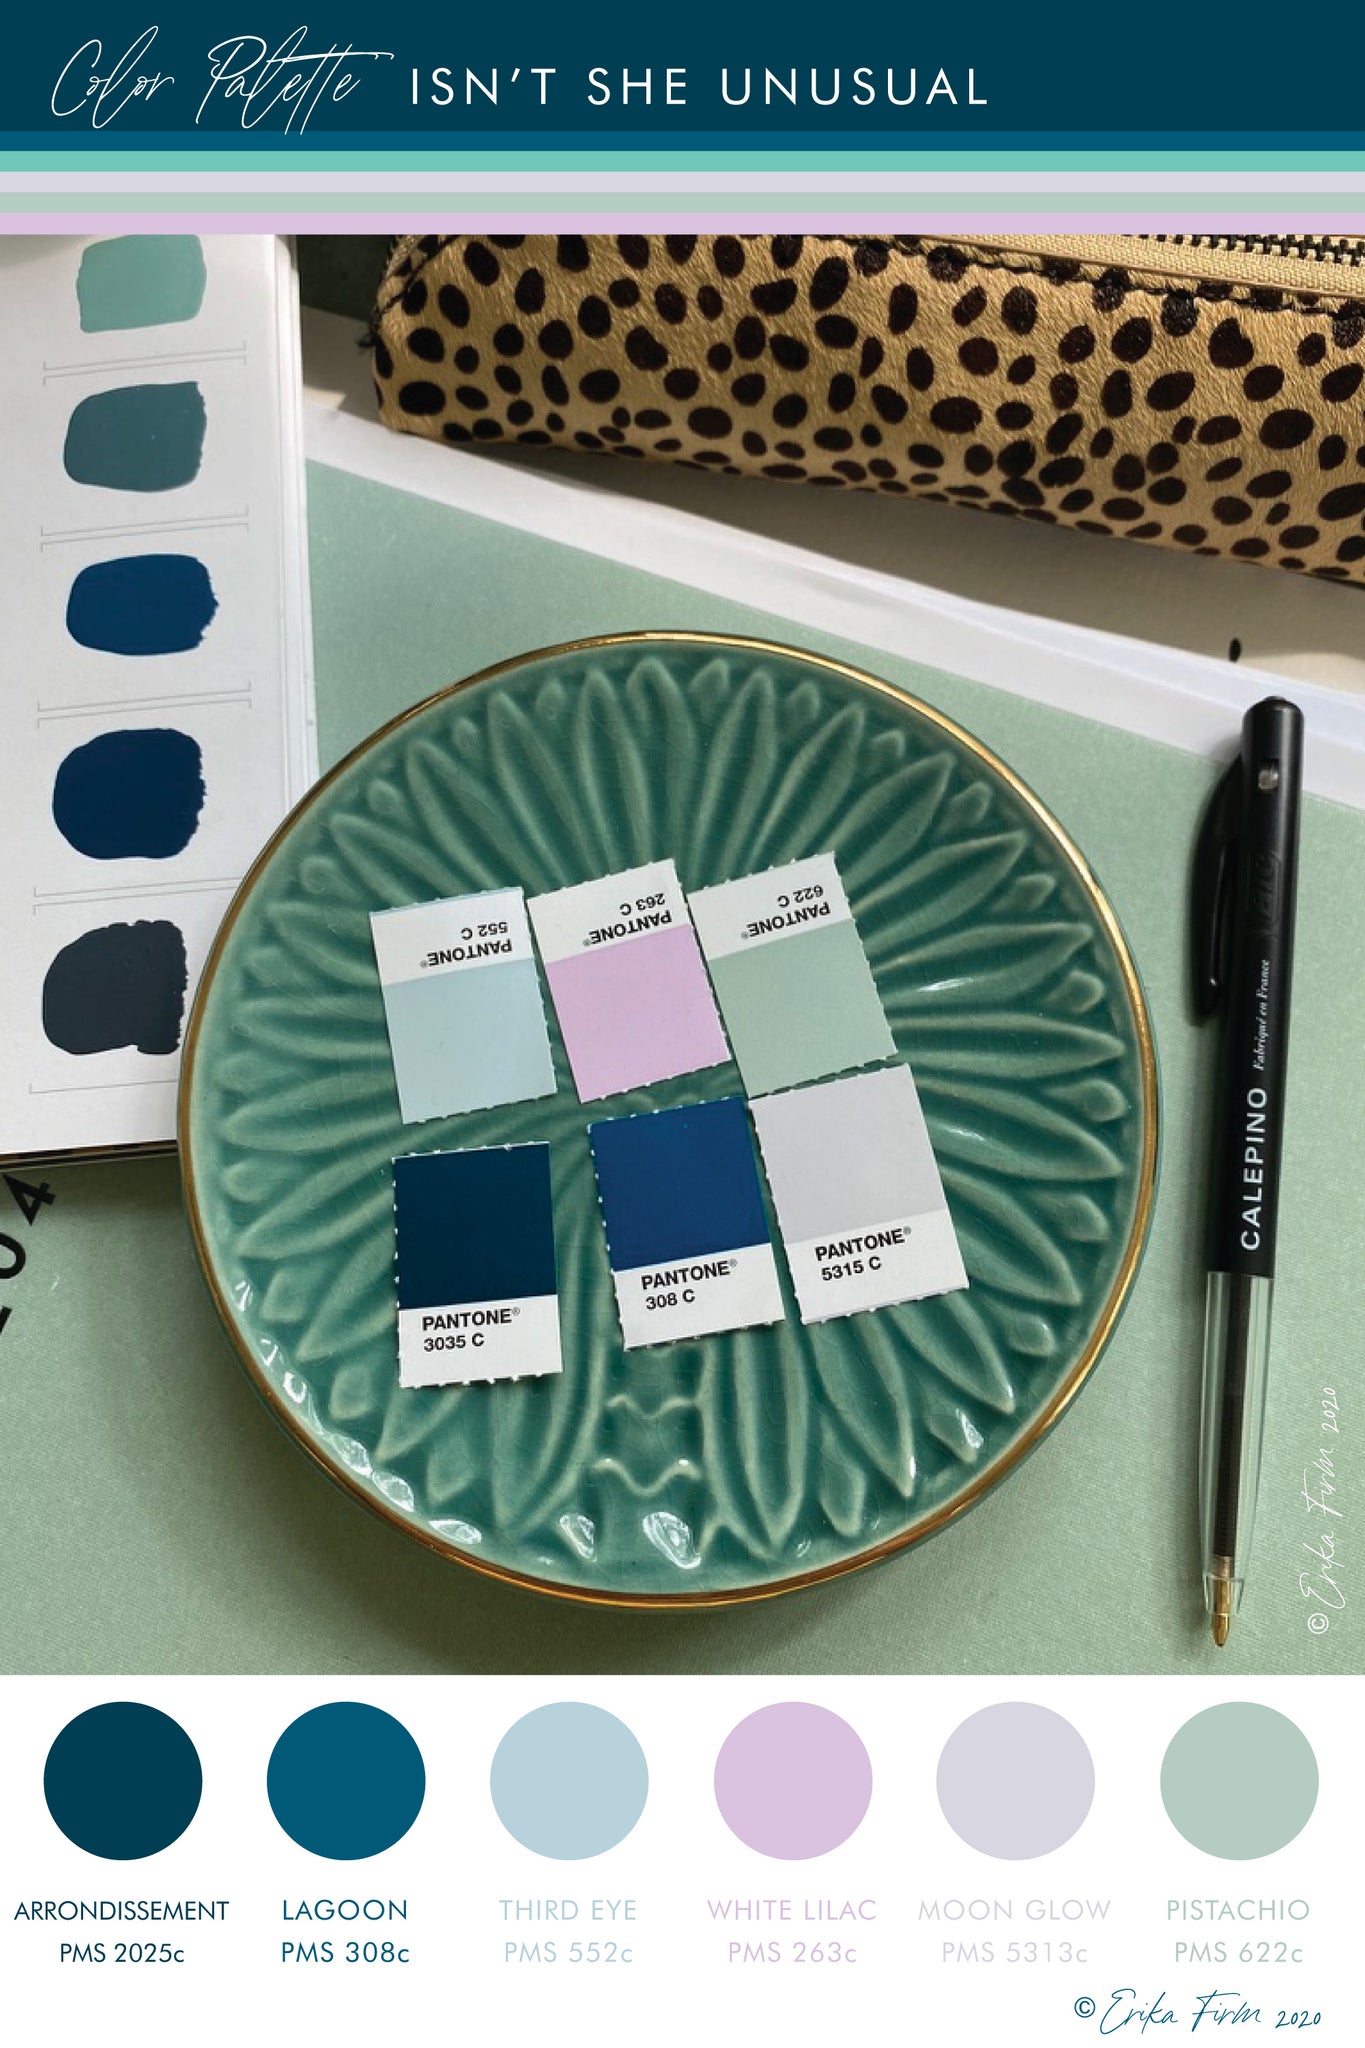 Color Palette Isn't She Unusual by Erika Firm featuring Dark Arrondissement Blue, Lagoon blue, third eye blue, white lilac, moon glow grey, and pistachio green